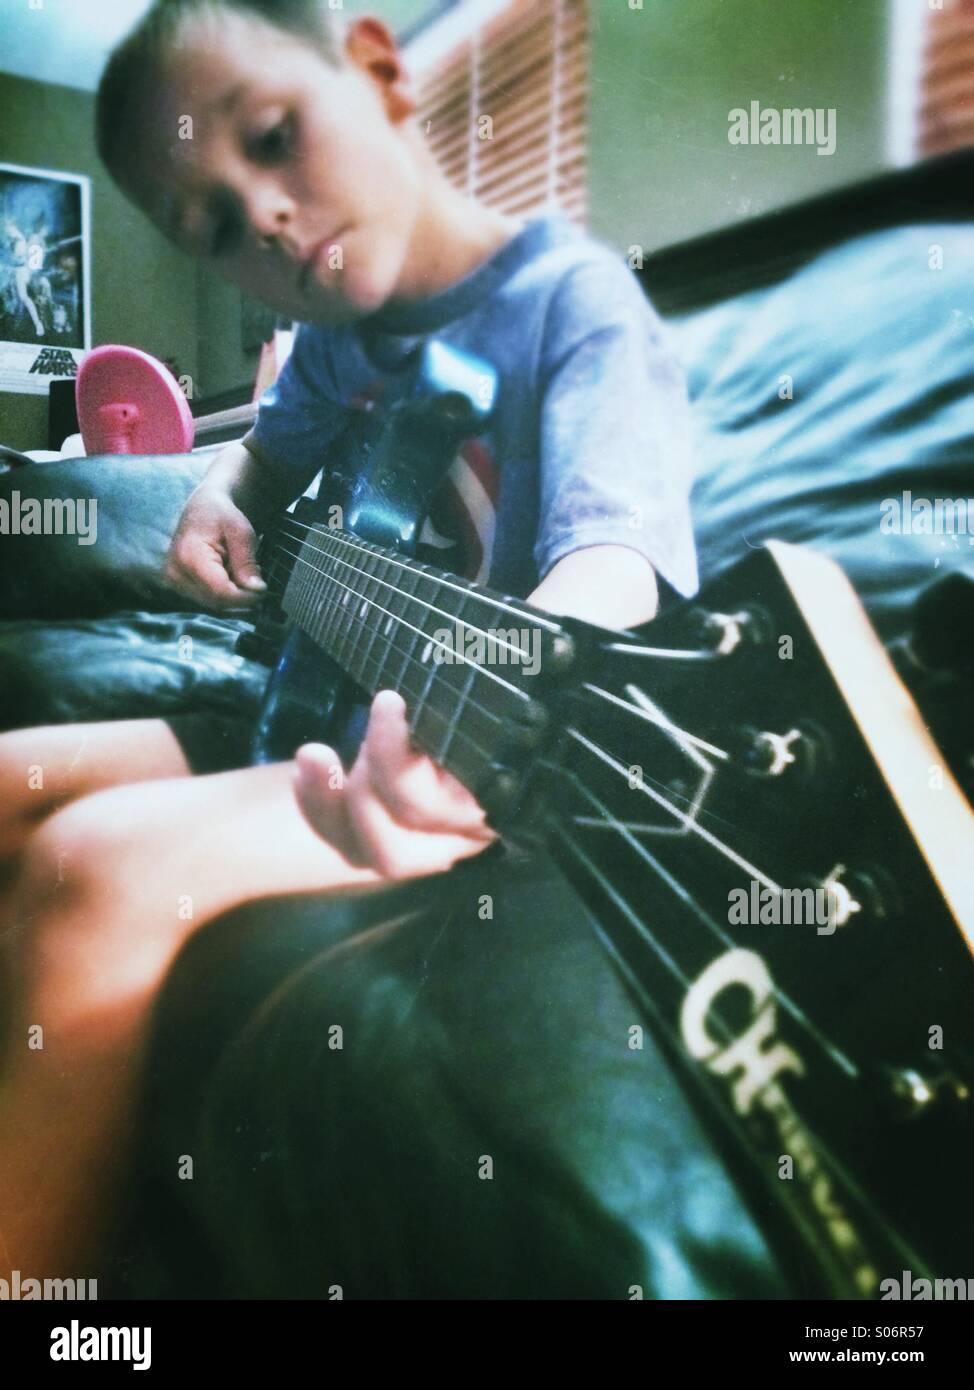 A young boy practices playing guitar Stock Photo